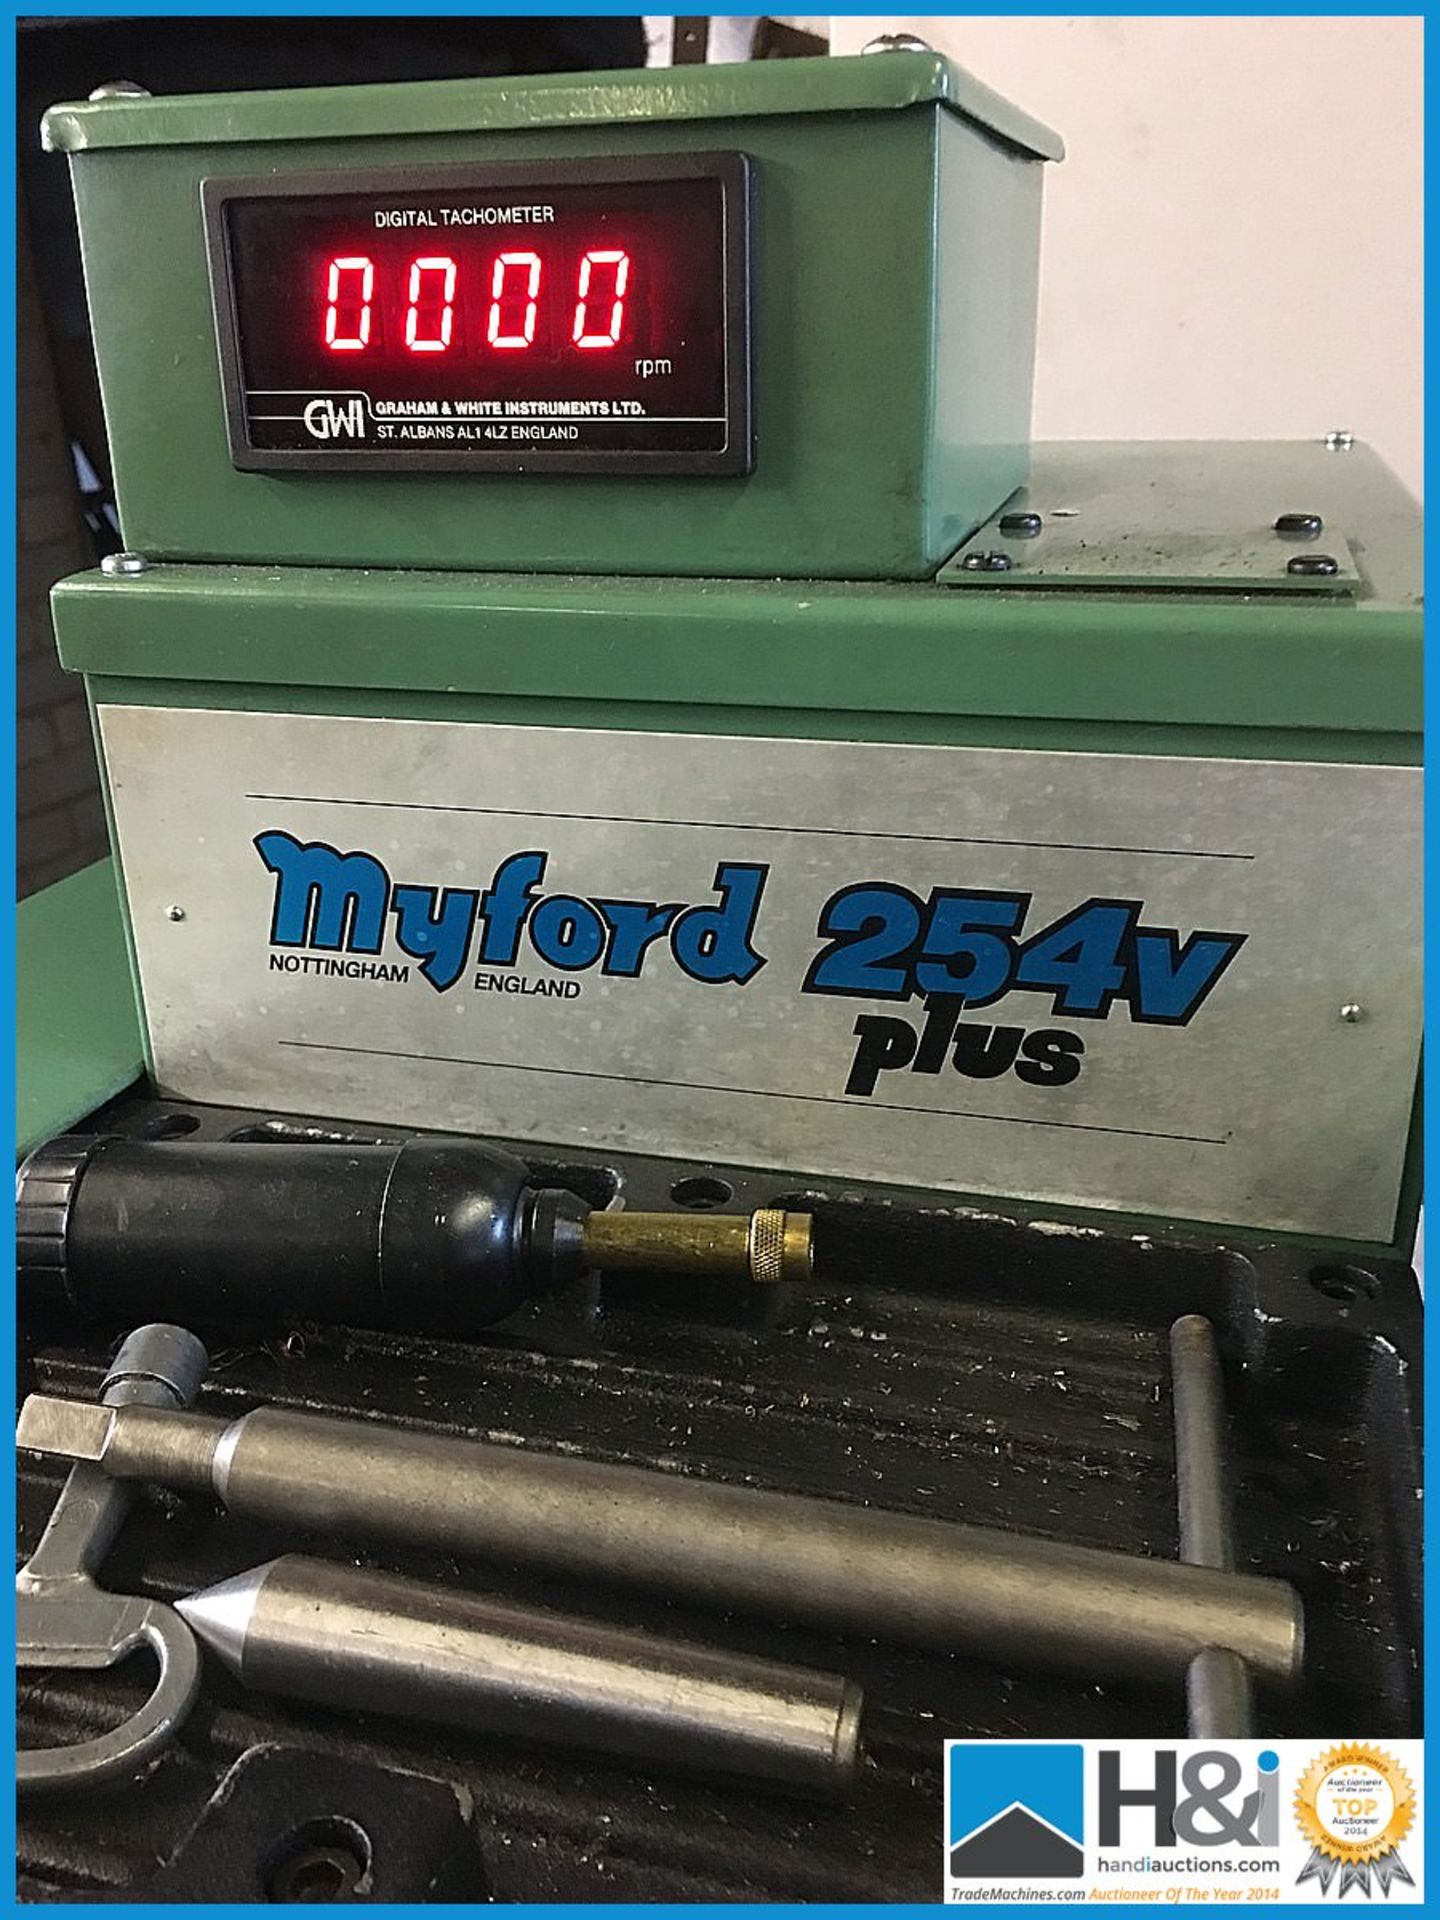 Absolutely stunning Myford 254v Plus single phase metalworking lathe in near immaculate condition, - Image 5 of 29